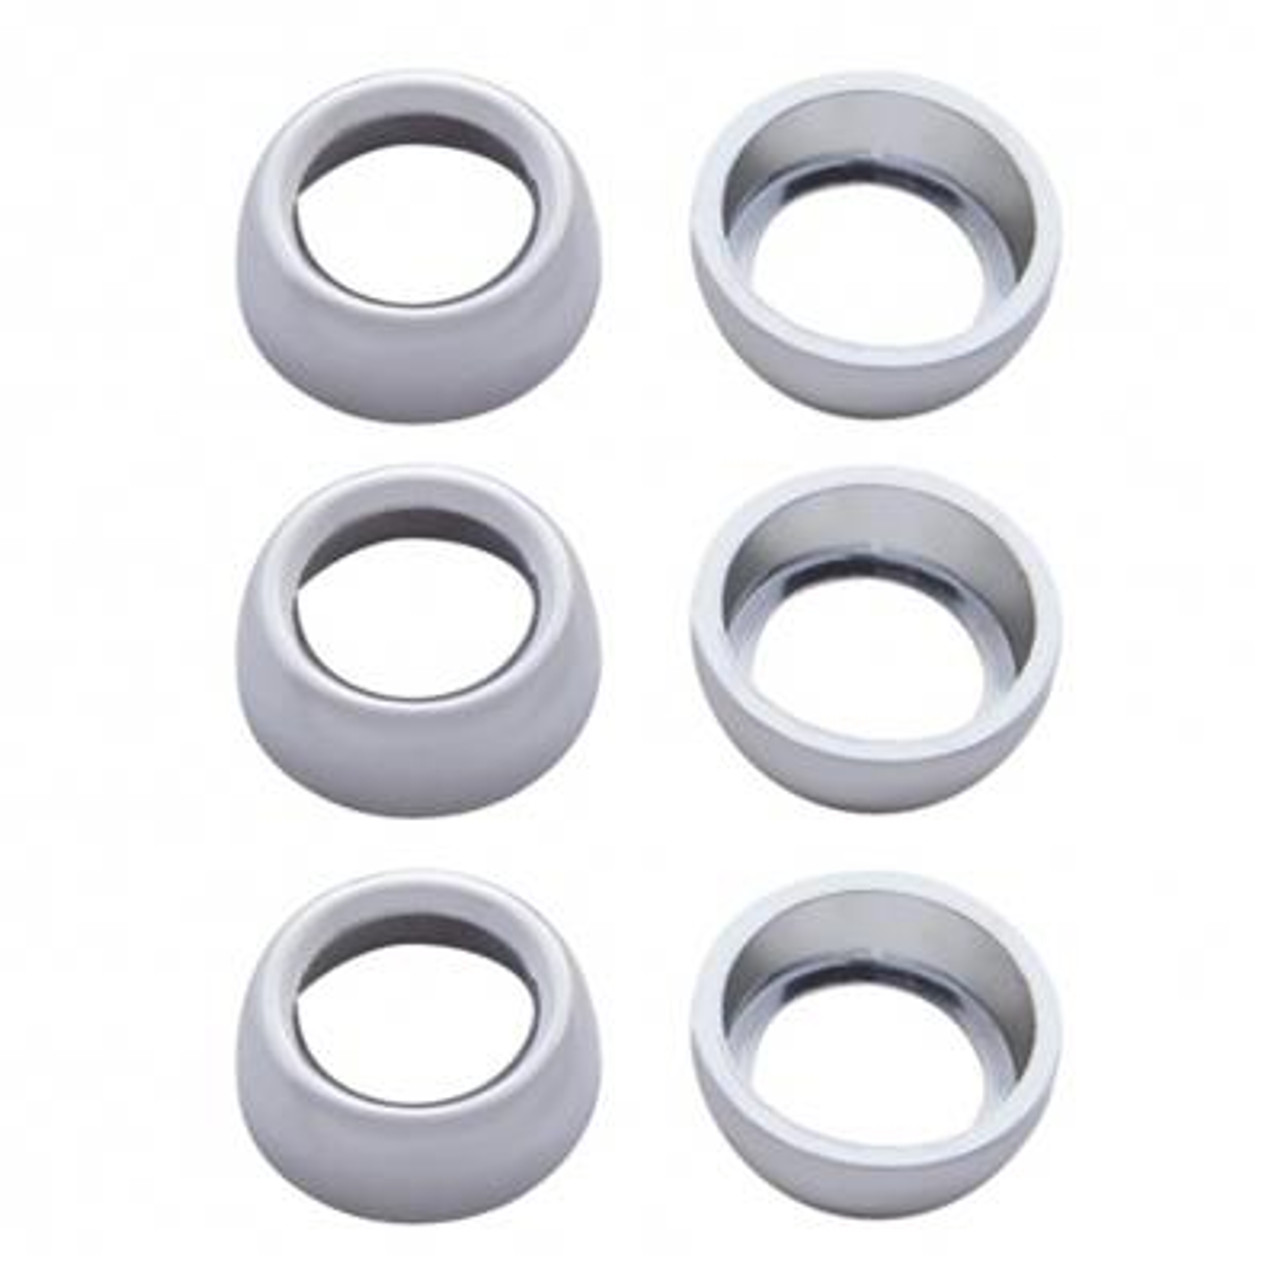 Freightliner Chrome Plastic Toggle Switch Nut Cover 6 Pack